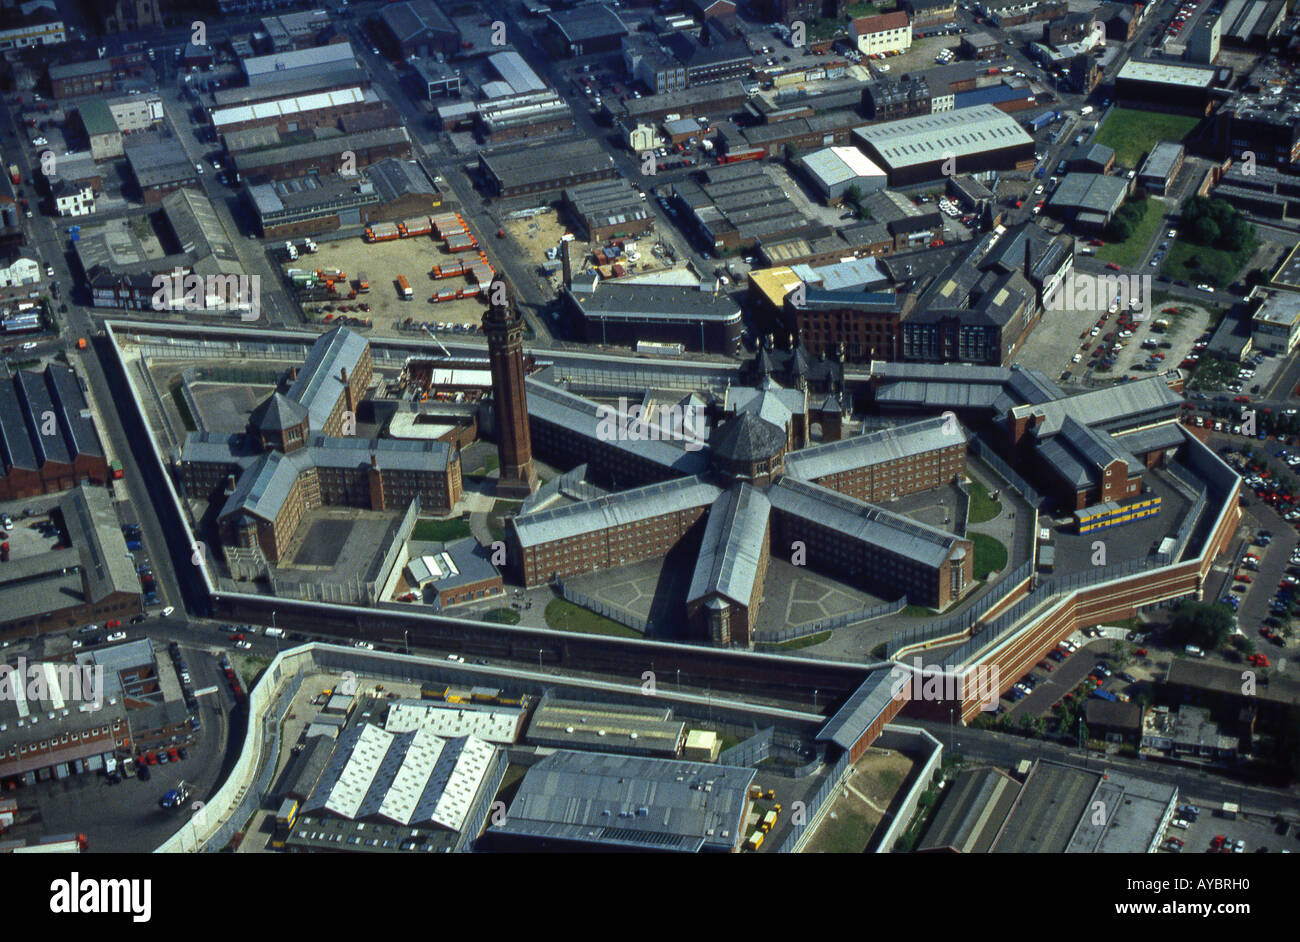 An Aerial View of Strangeways Prison, Greater Manchester, England, UK Stock Photo